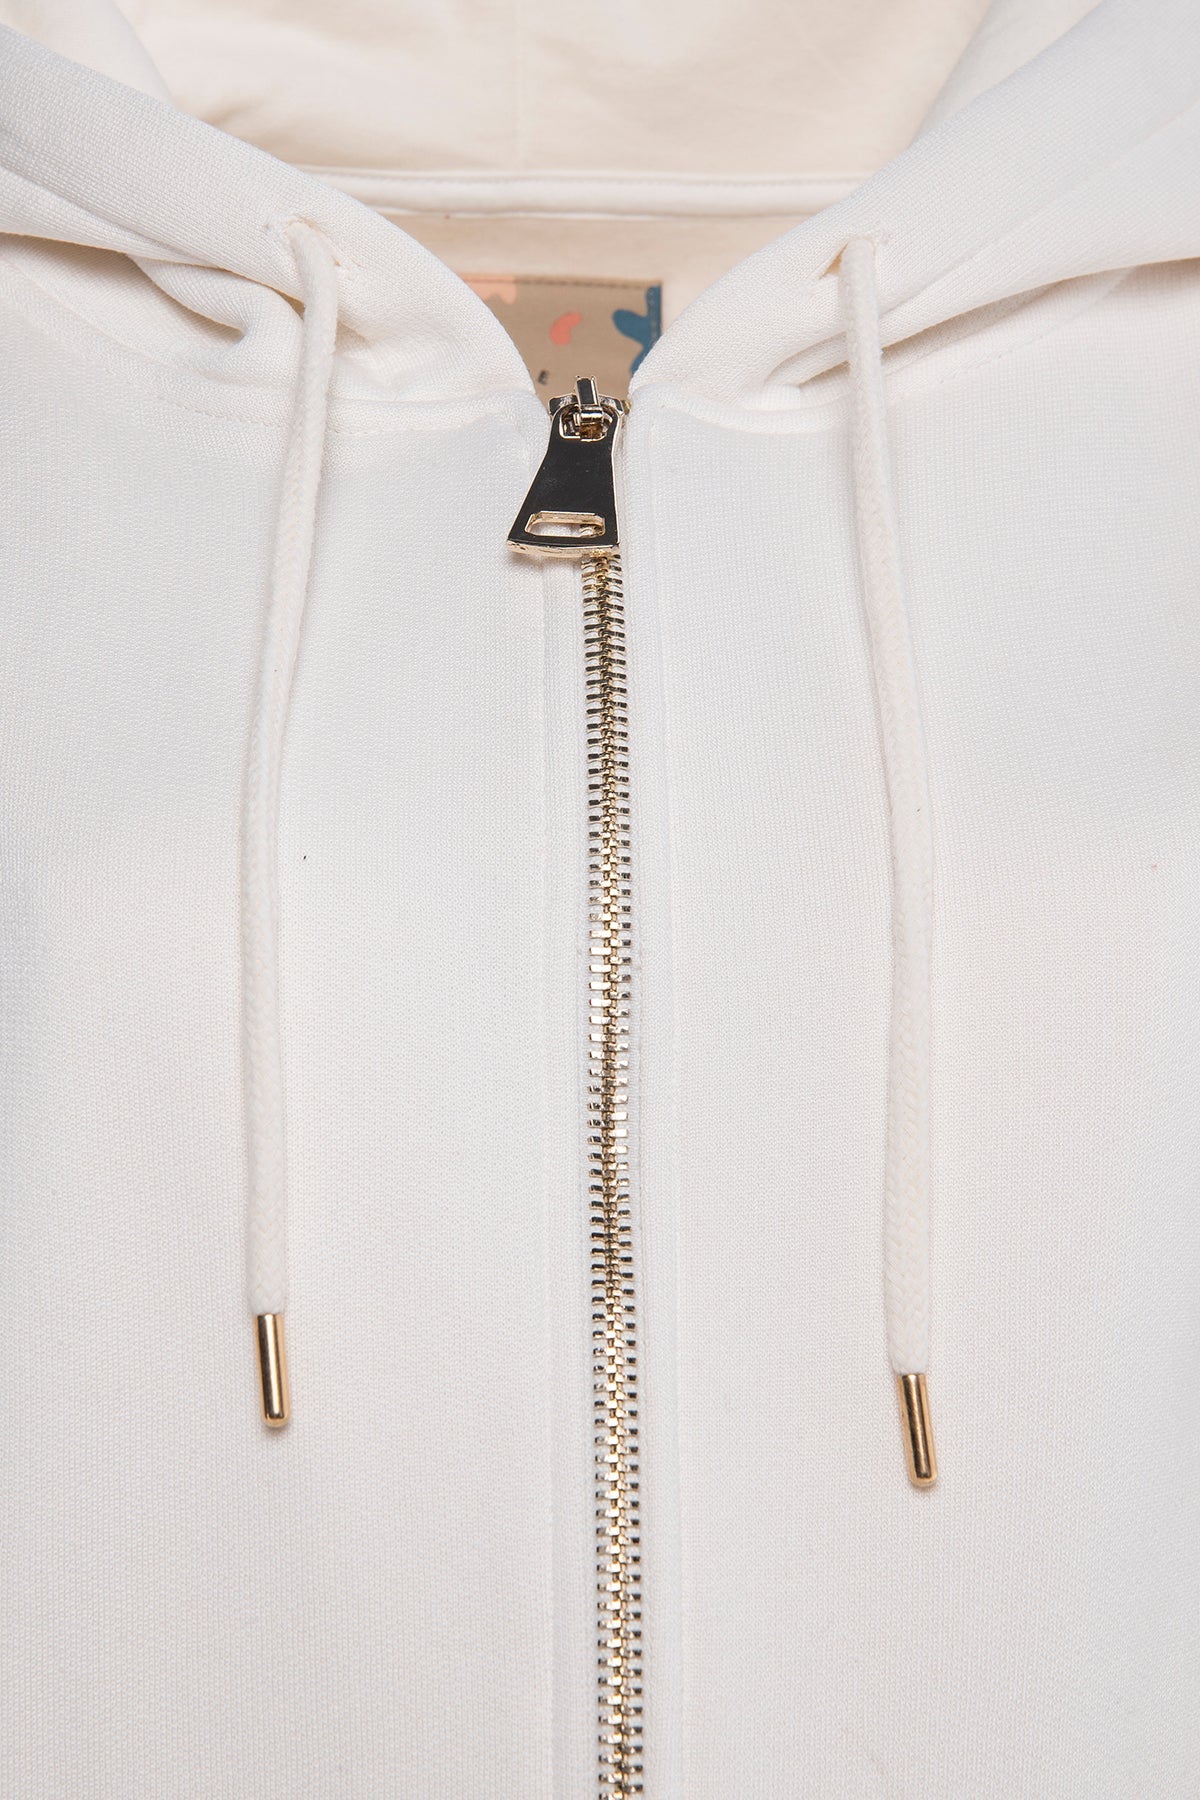 Oversized full-zip hoodie with gold zipper in rice white.